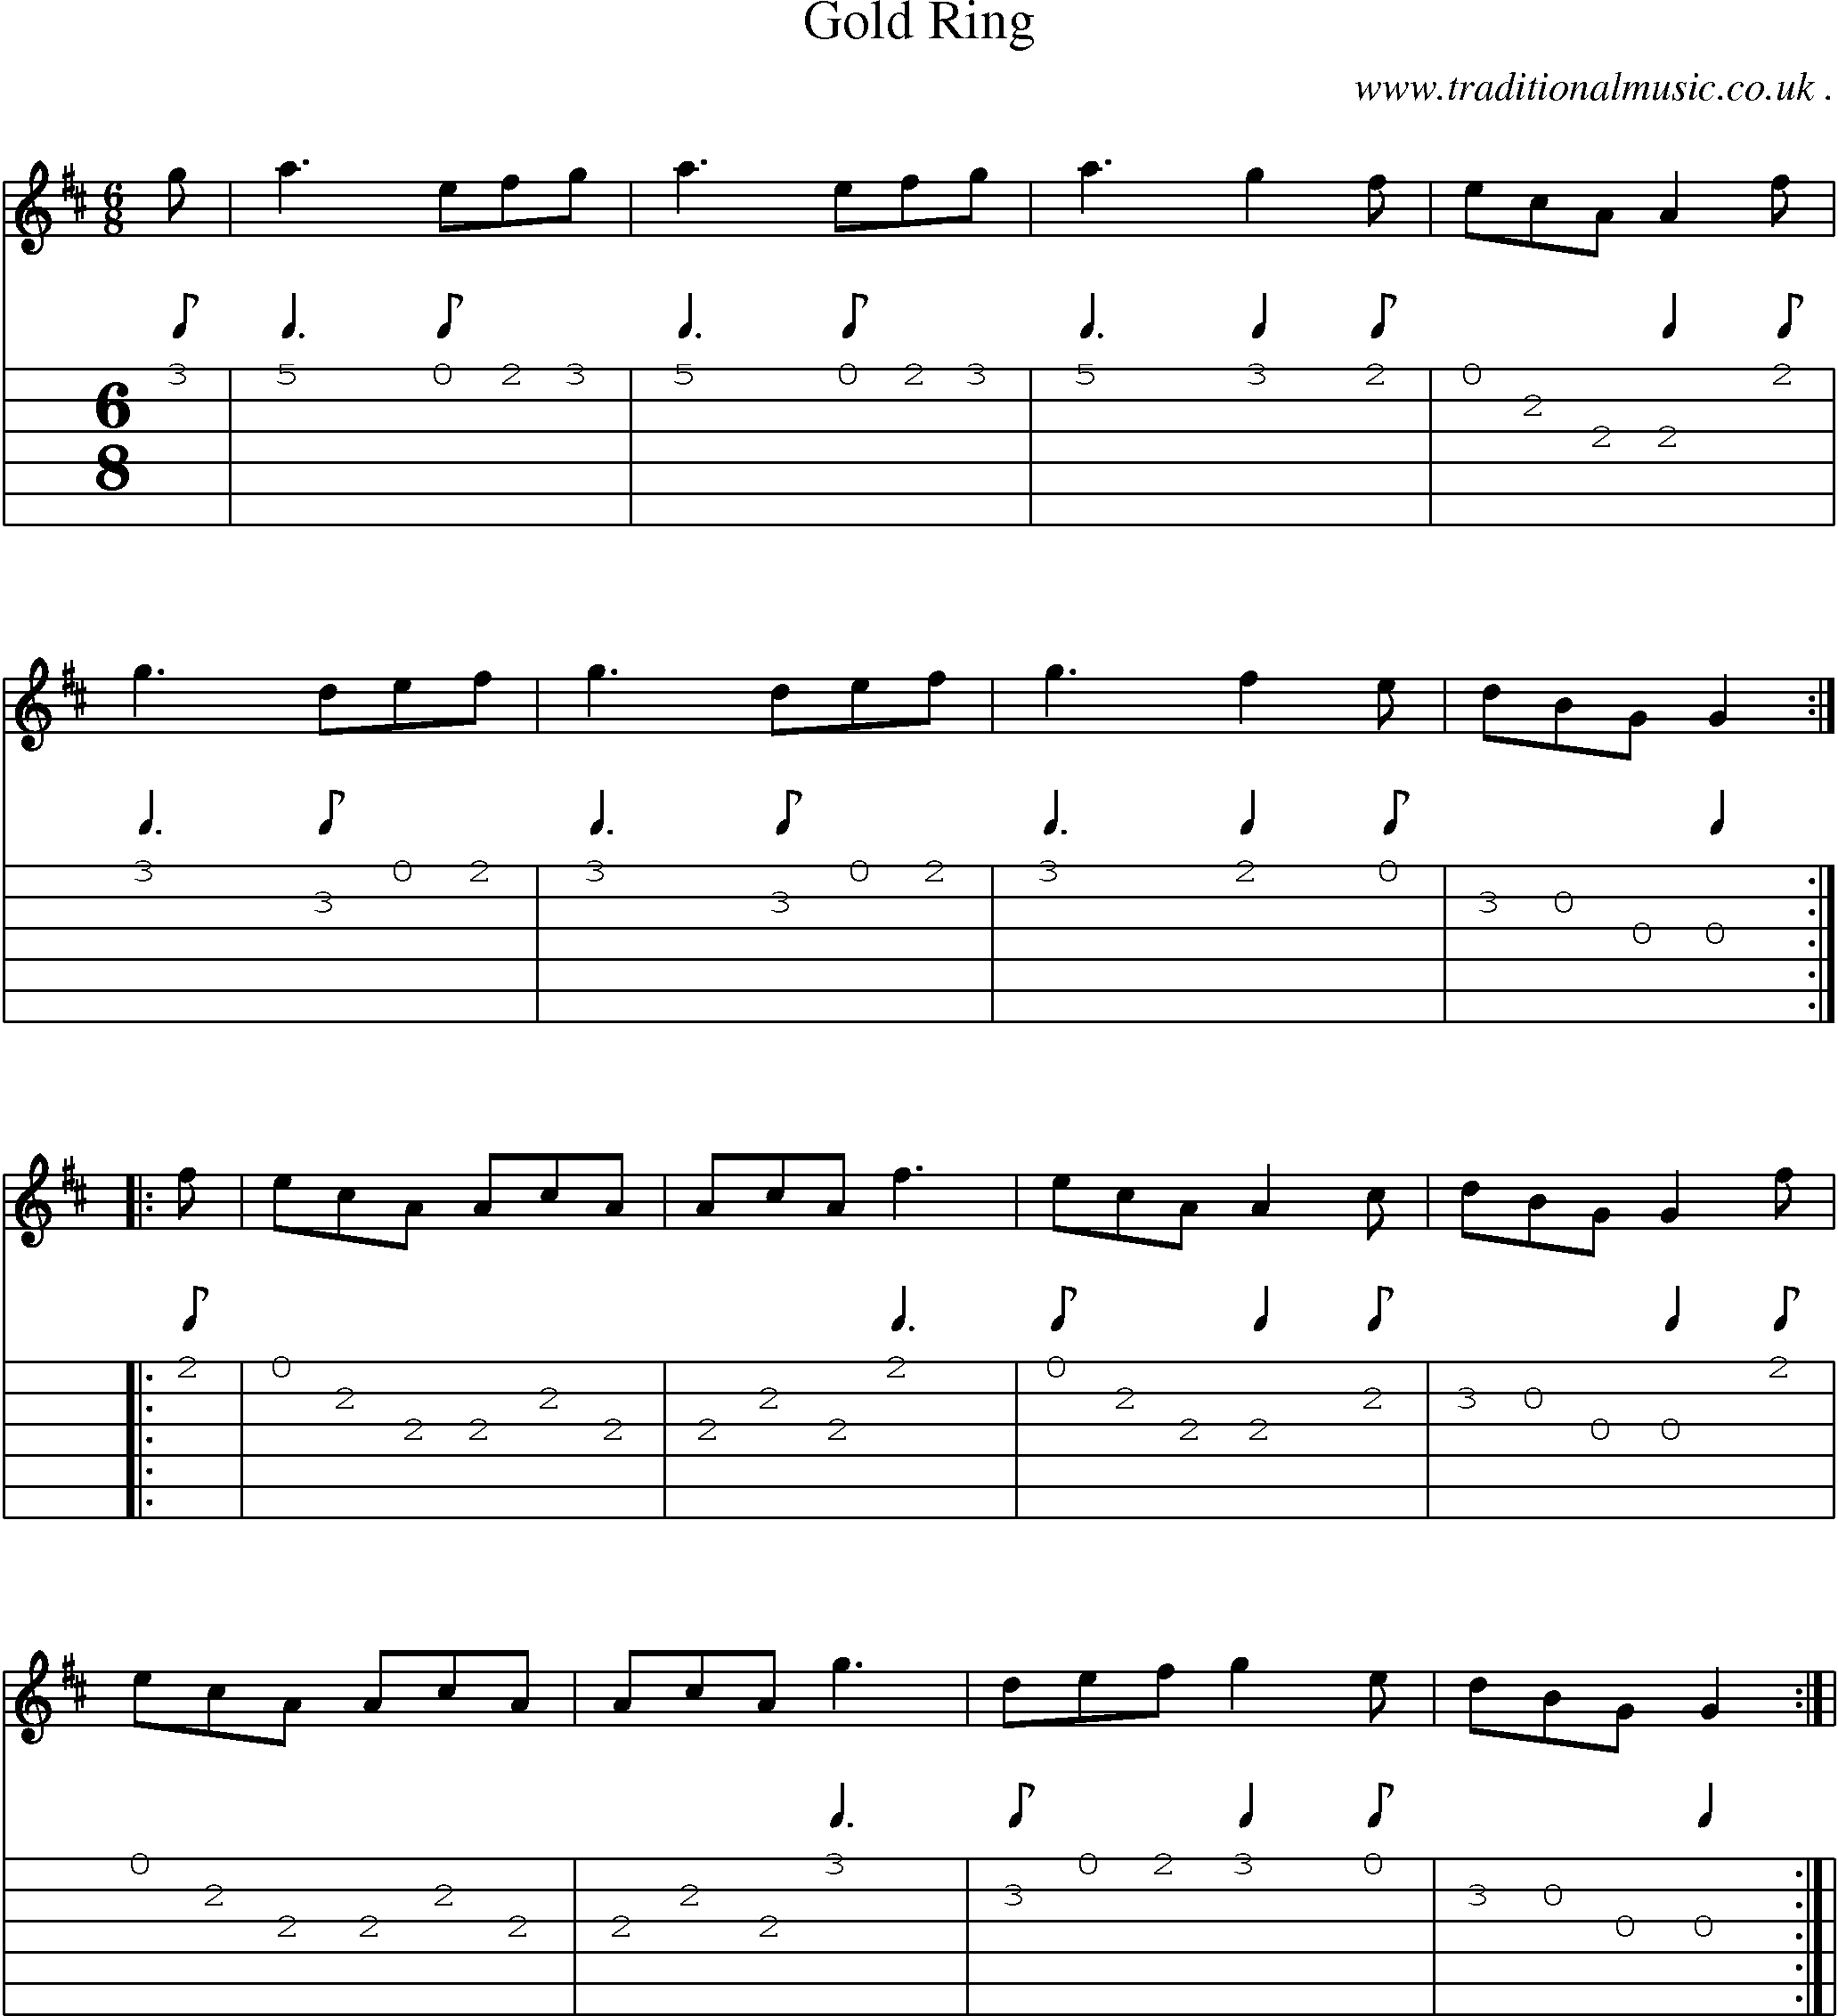 Sheet-Music and Guitar Tabs for Gold Ring